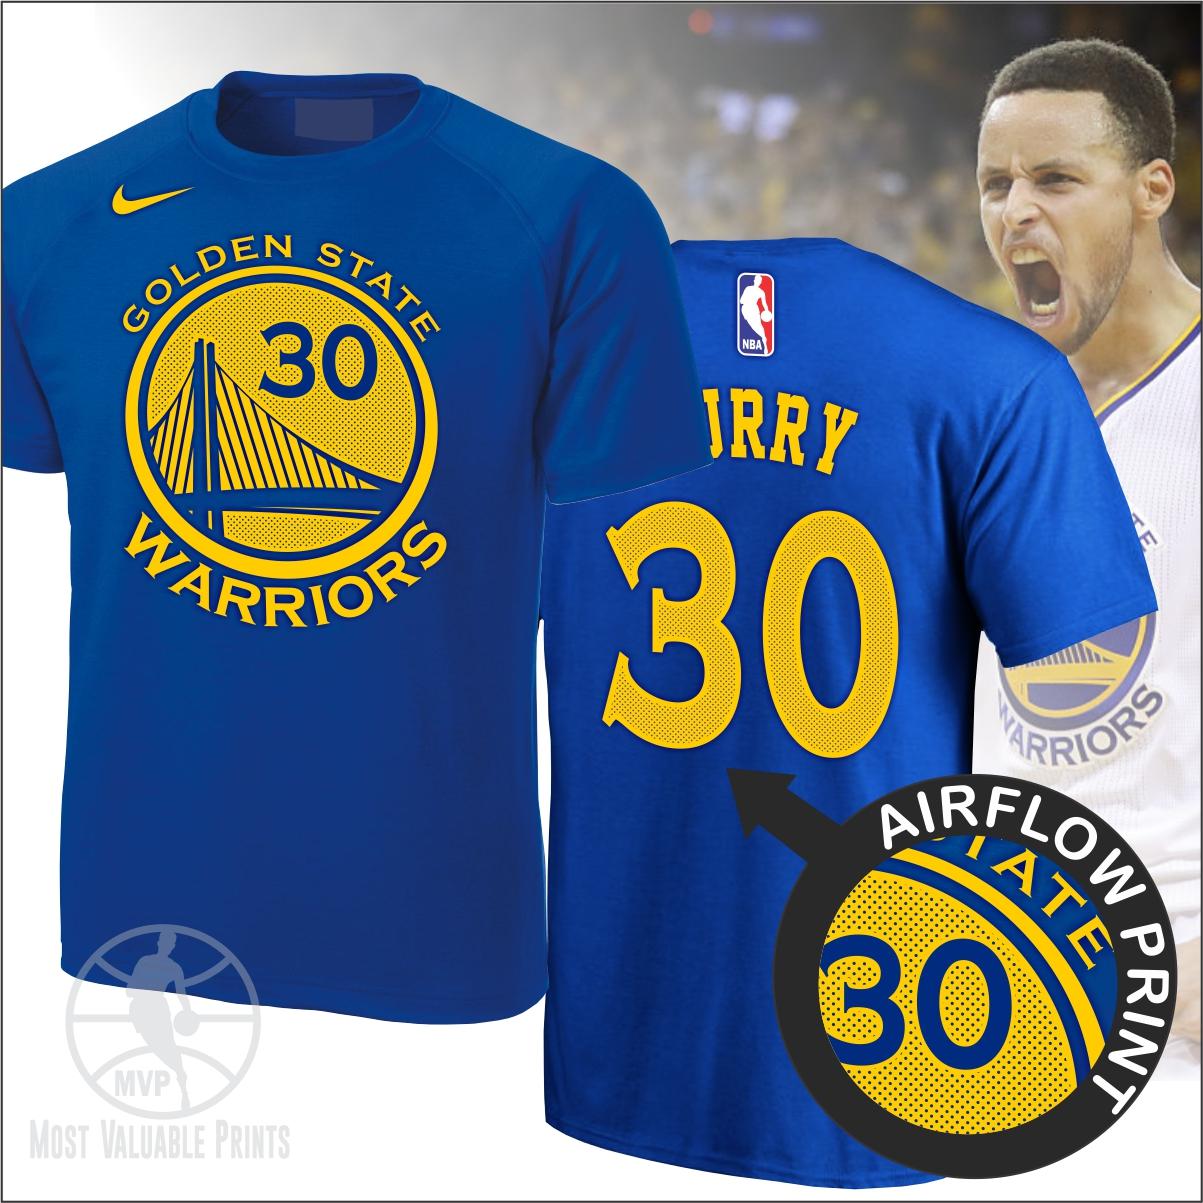 stephen curry jersey images